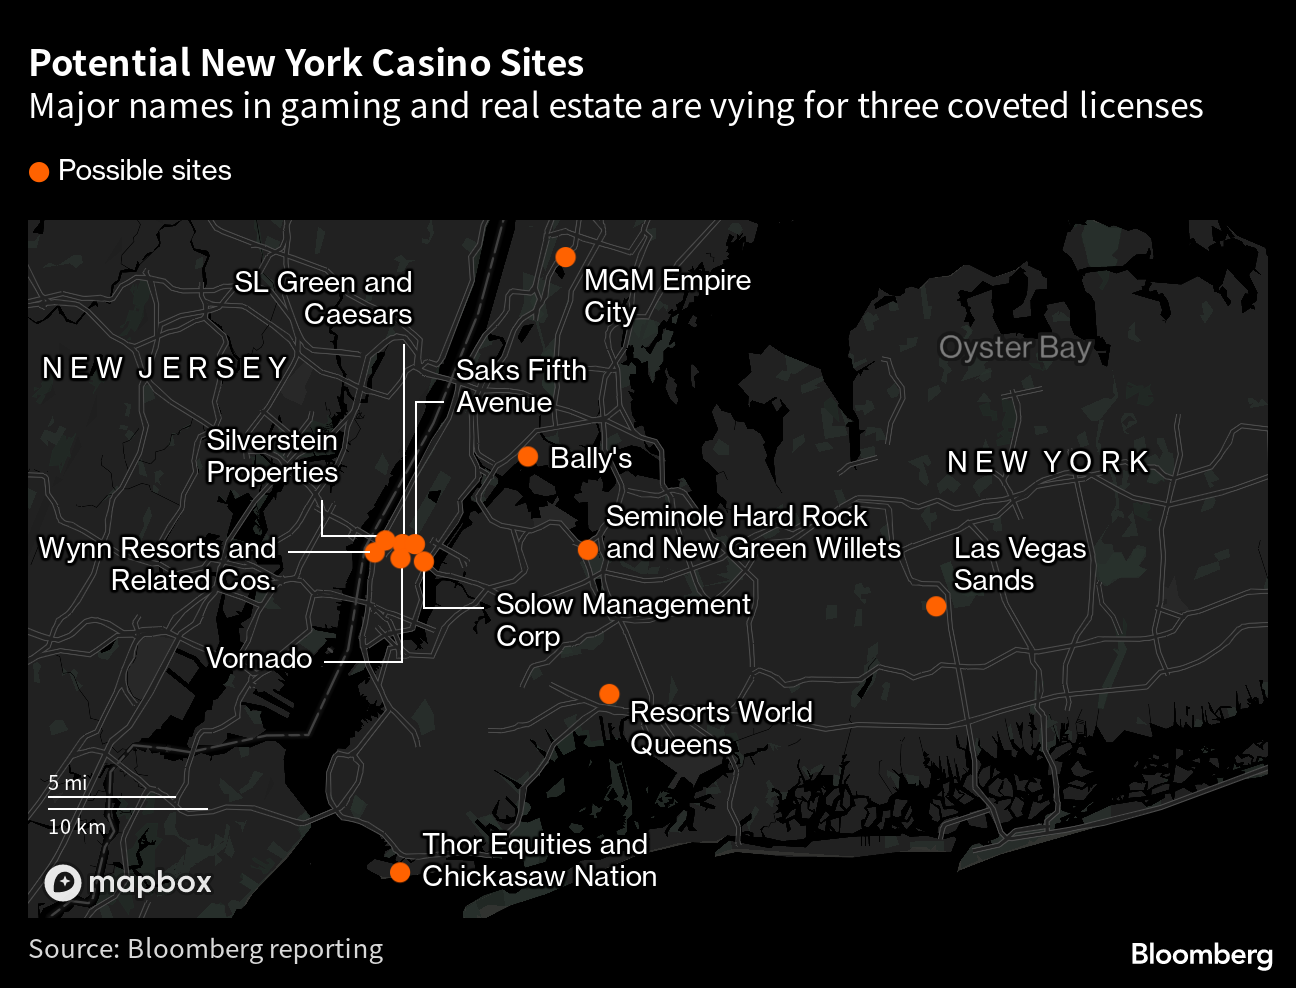 Mets Owner Steve Cohen Spends Big to Win New York City Casino License -  Bloomberg